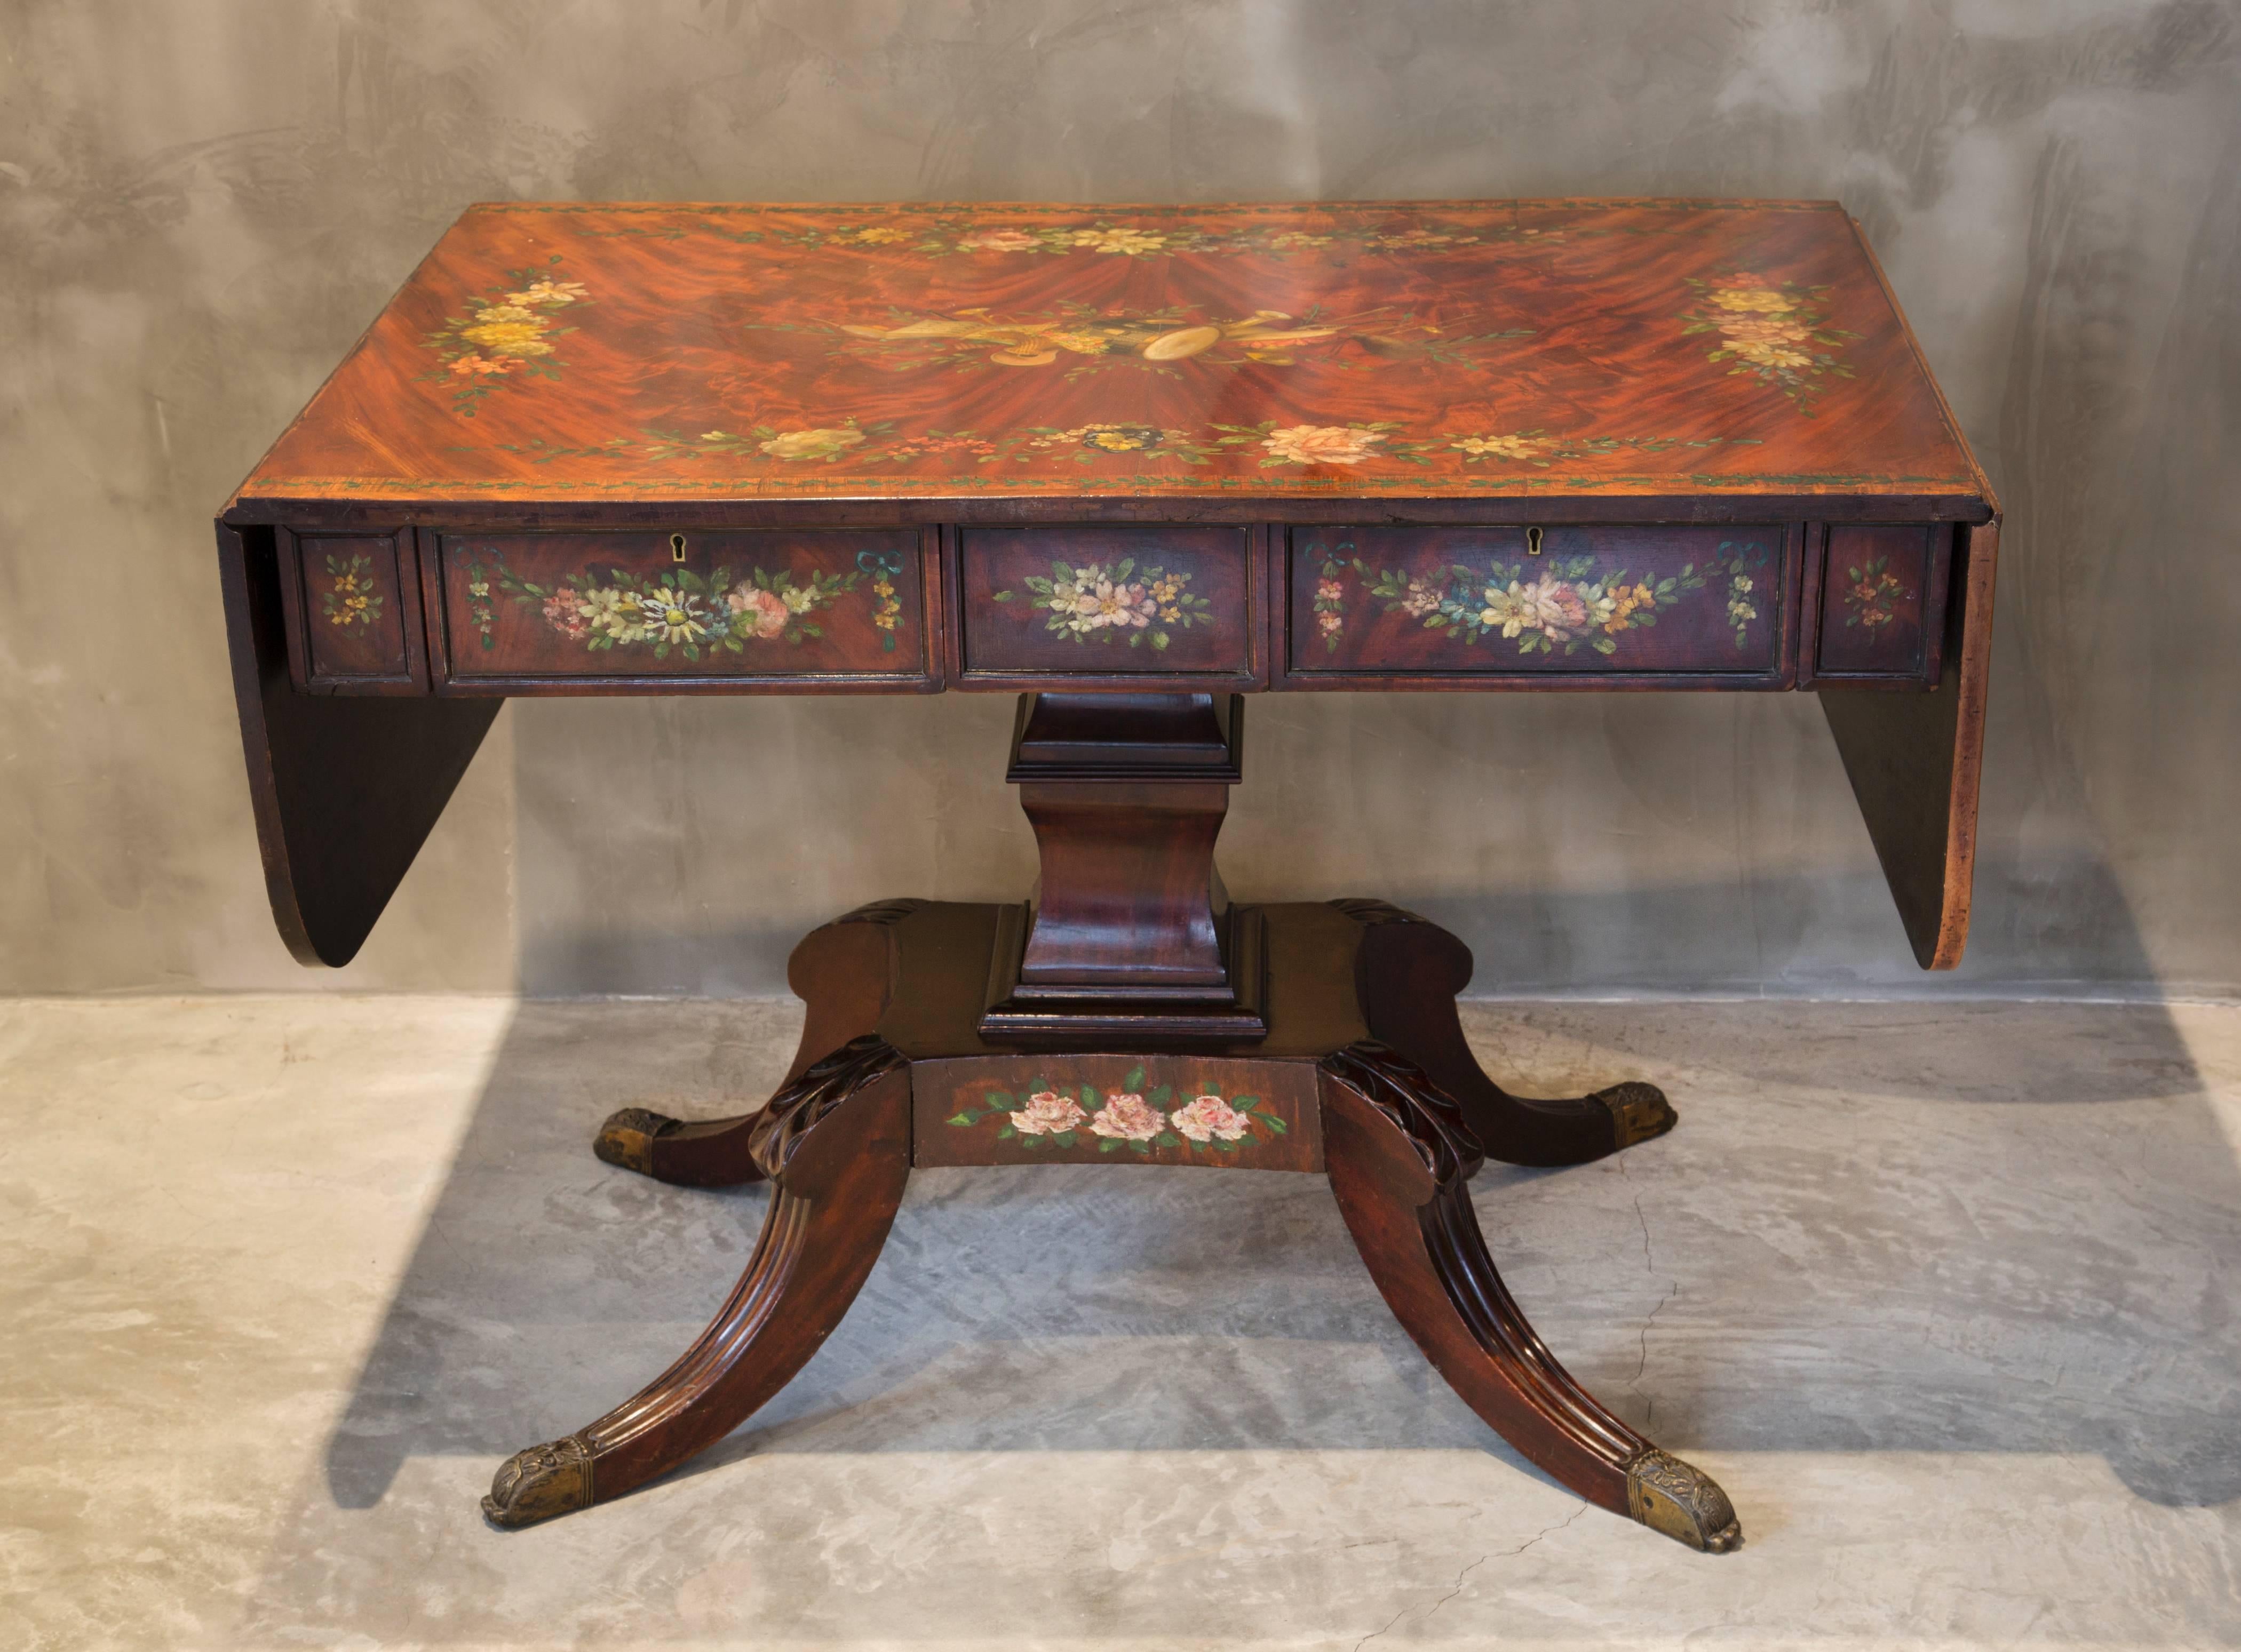 This beautiful Regency style burr mahogany table is a one-of-a-kind piece thanks to a previous owner painting it in flowers and musical motifs. It has handsome proportions with it's central column on sabre legs under two drawers, one stamped Edwards